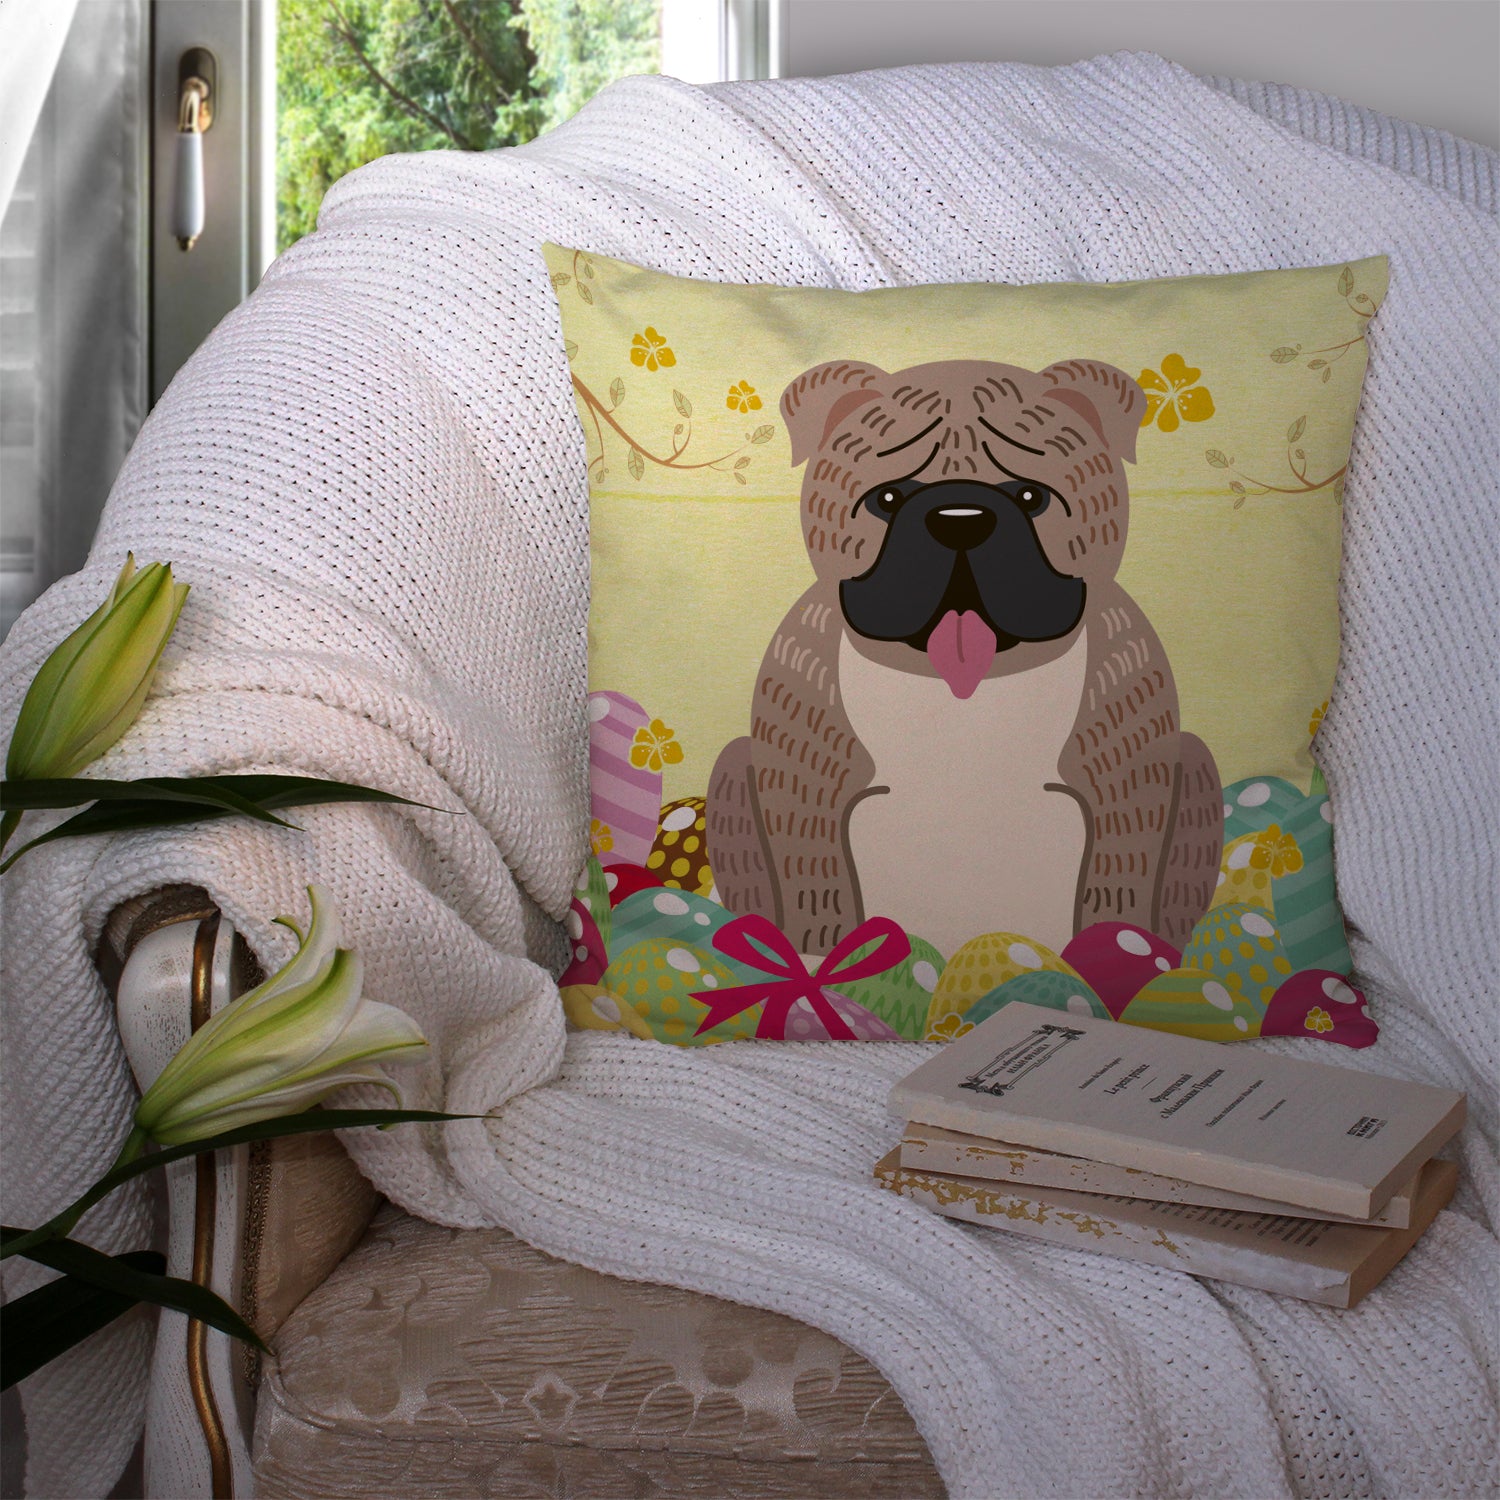 Easter Eggs English Bulldog Grey Brindle  Fabric Decorative Pillow BB6126PW1414 - the-store.com